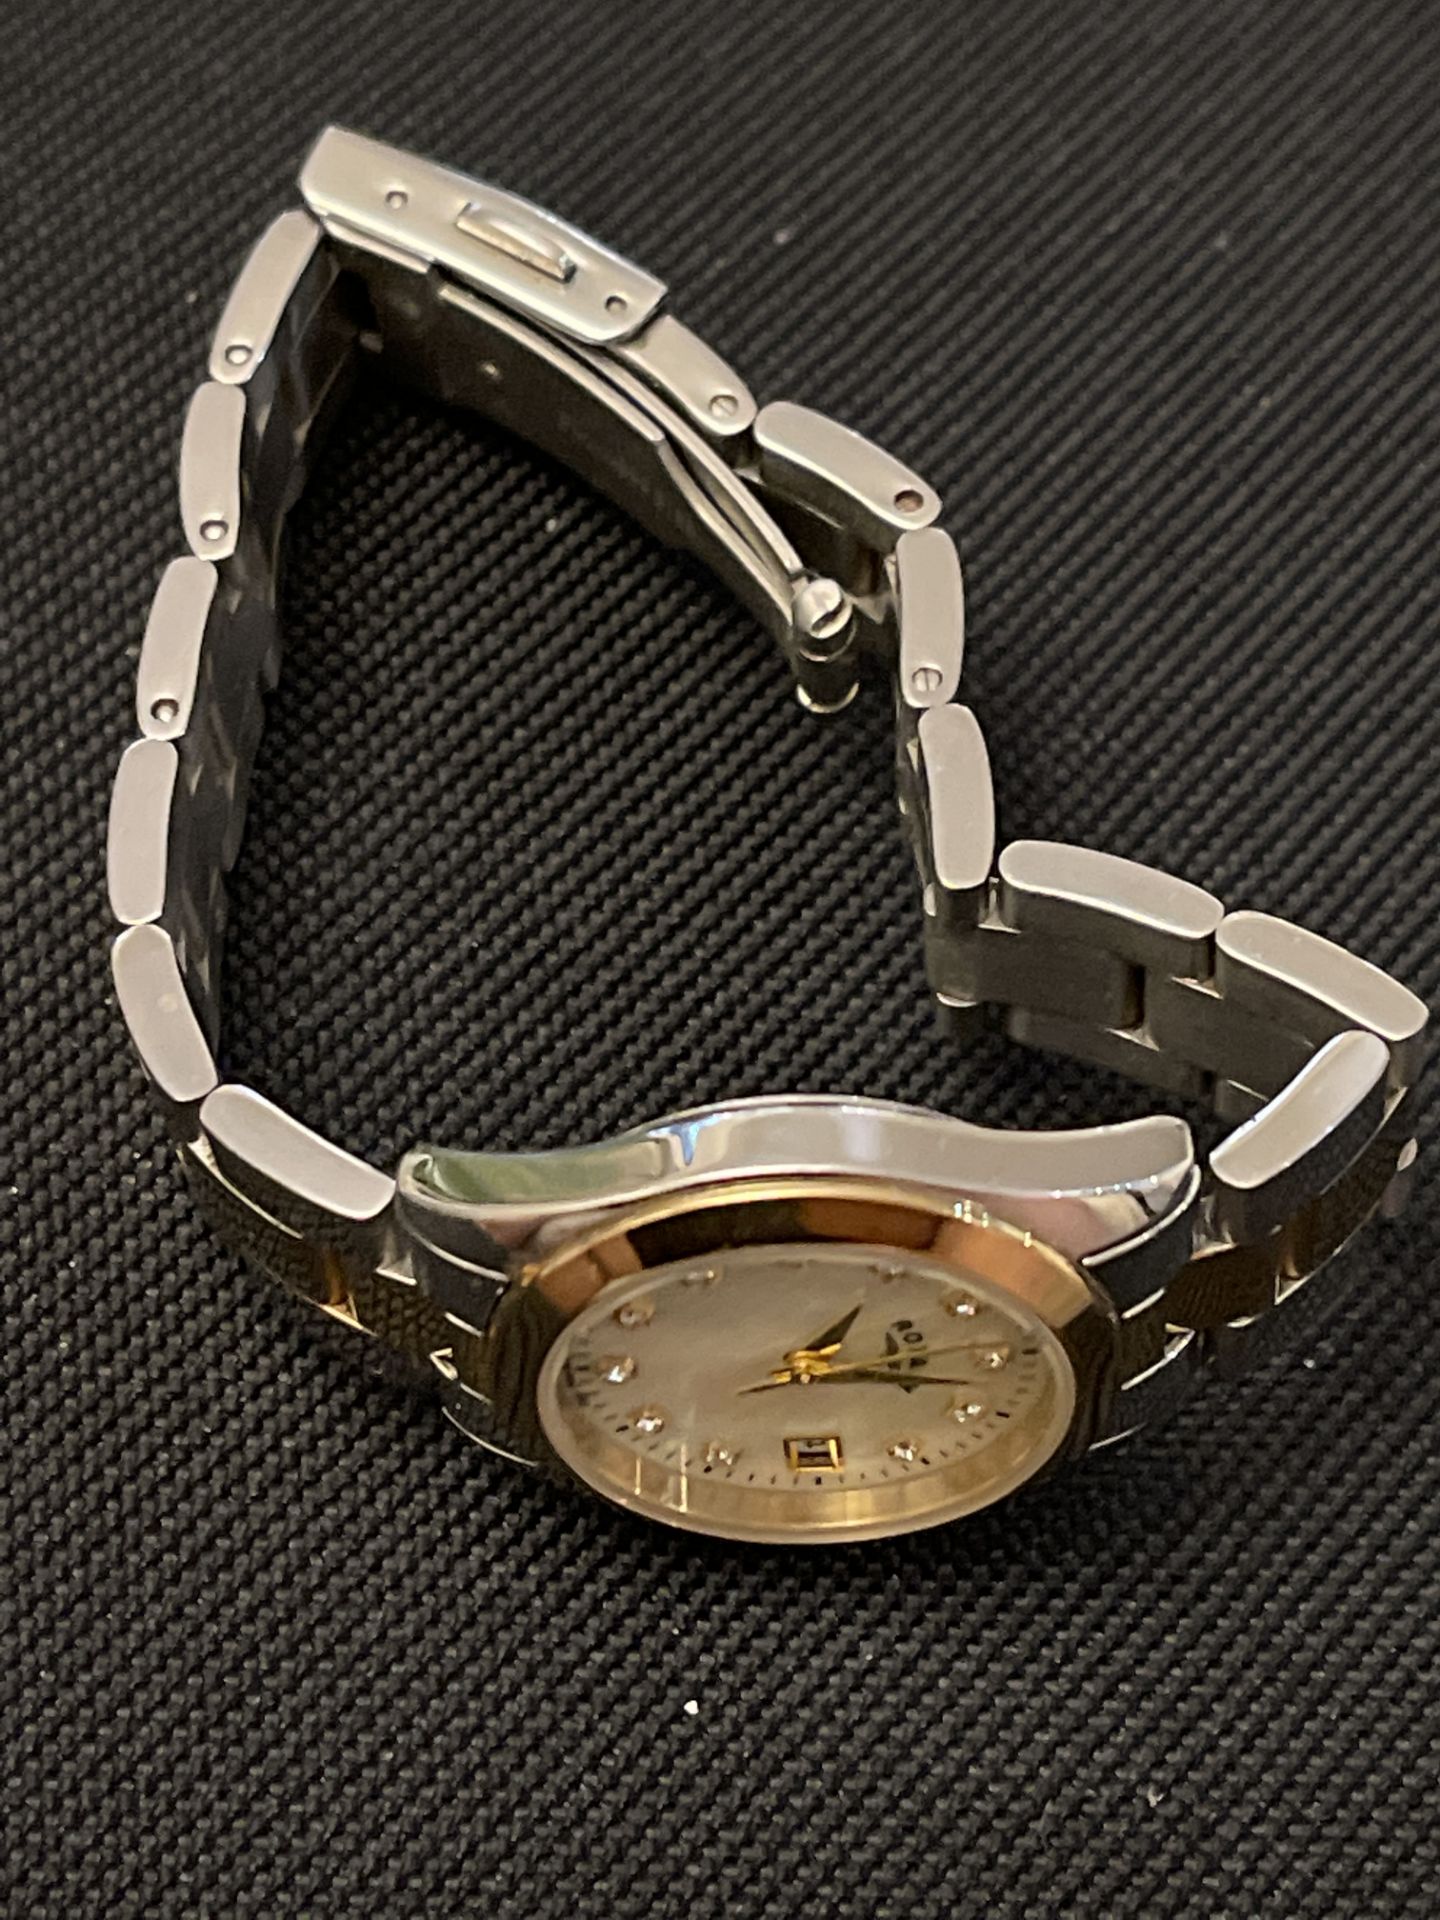 Rotary Ladies Quartz Watch, Day Date, Stainless Steel Bracelet, Gold Plated - Image 3 of 3